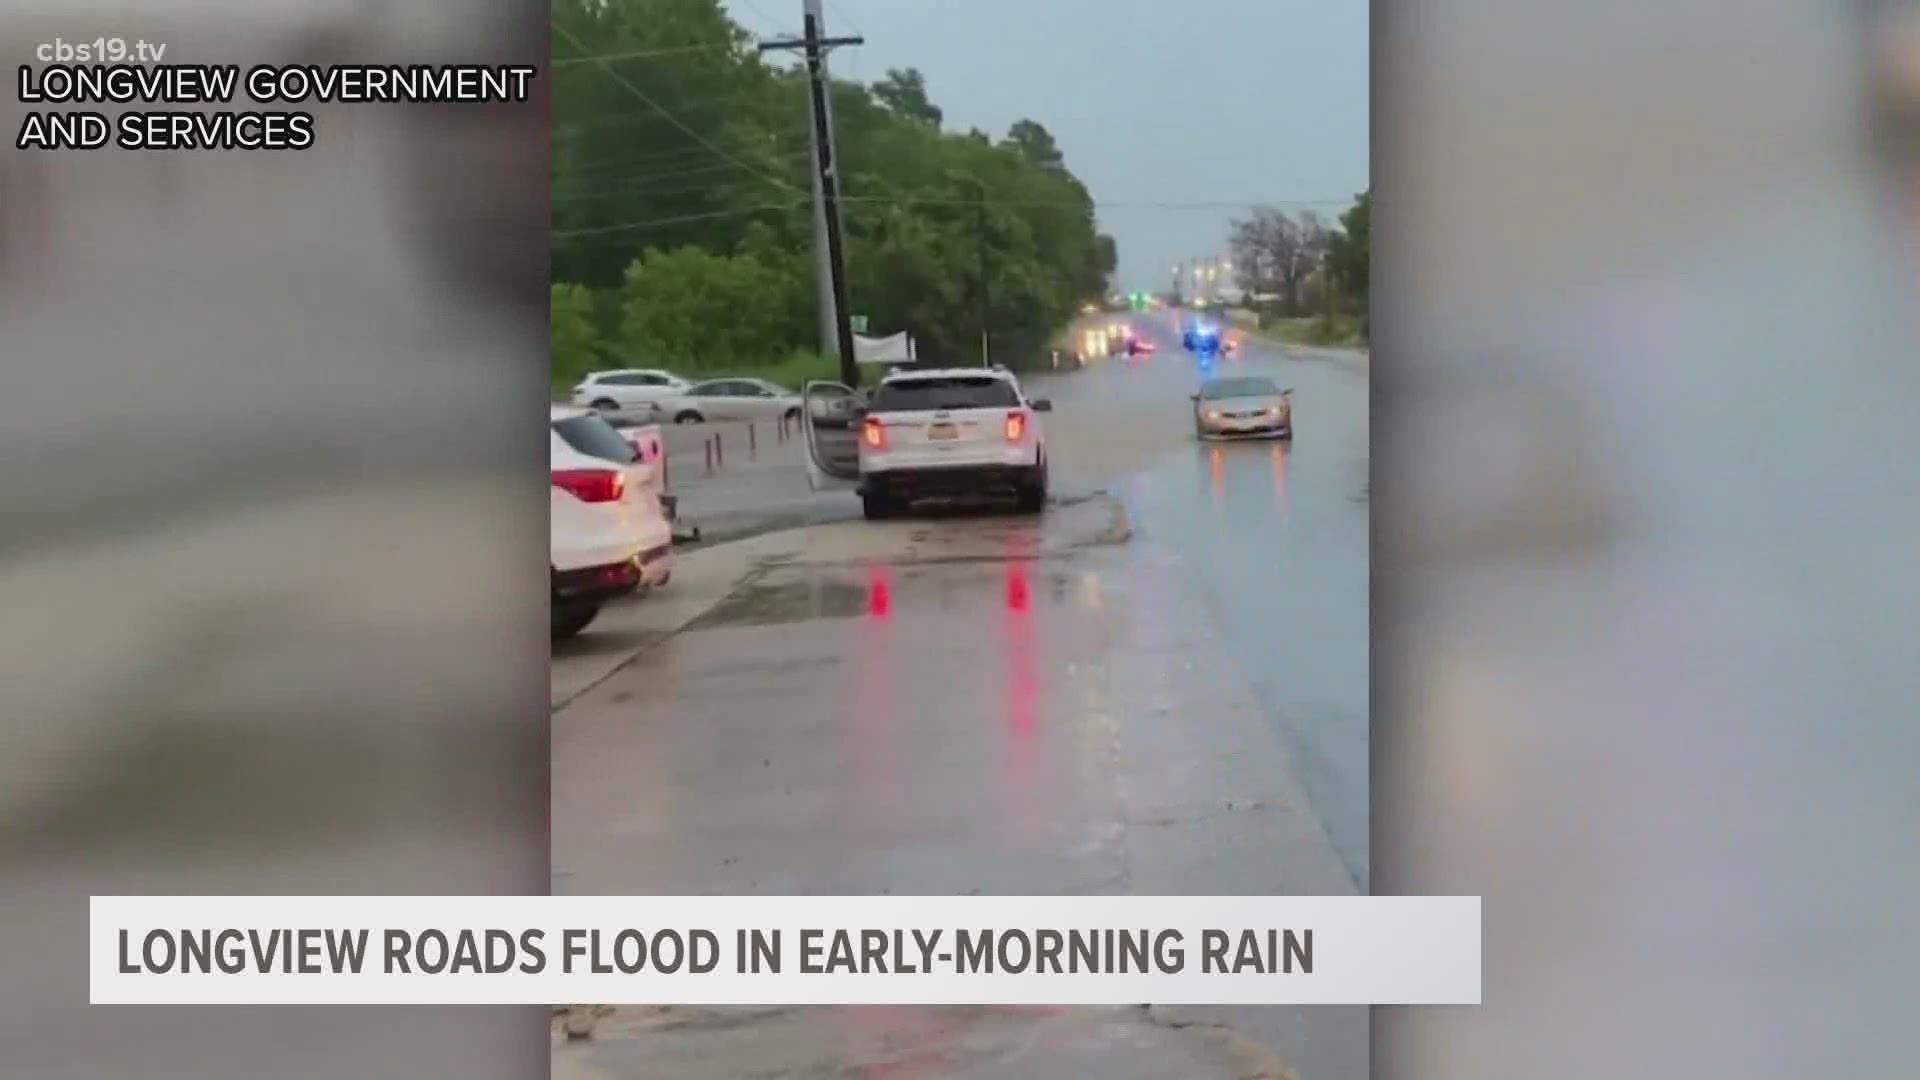 According to the fire marshal, several drivers had to be rescued when trying to cross flooded roads.